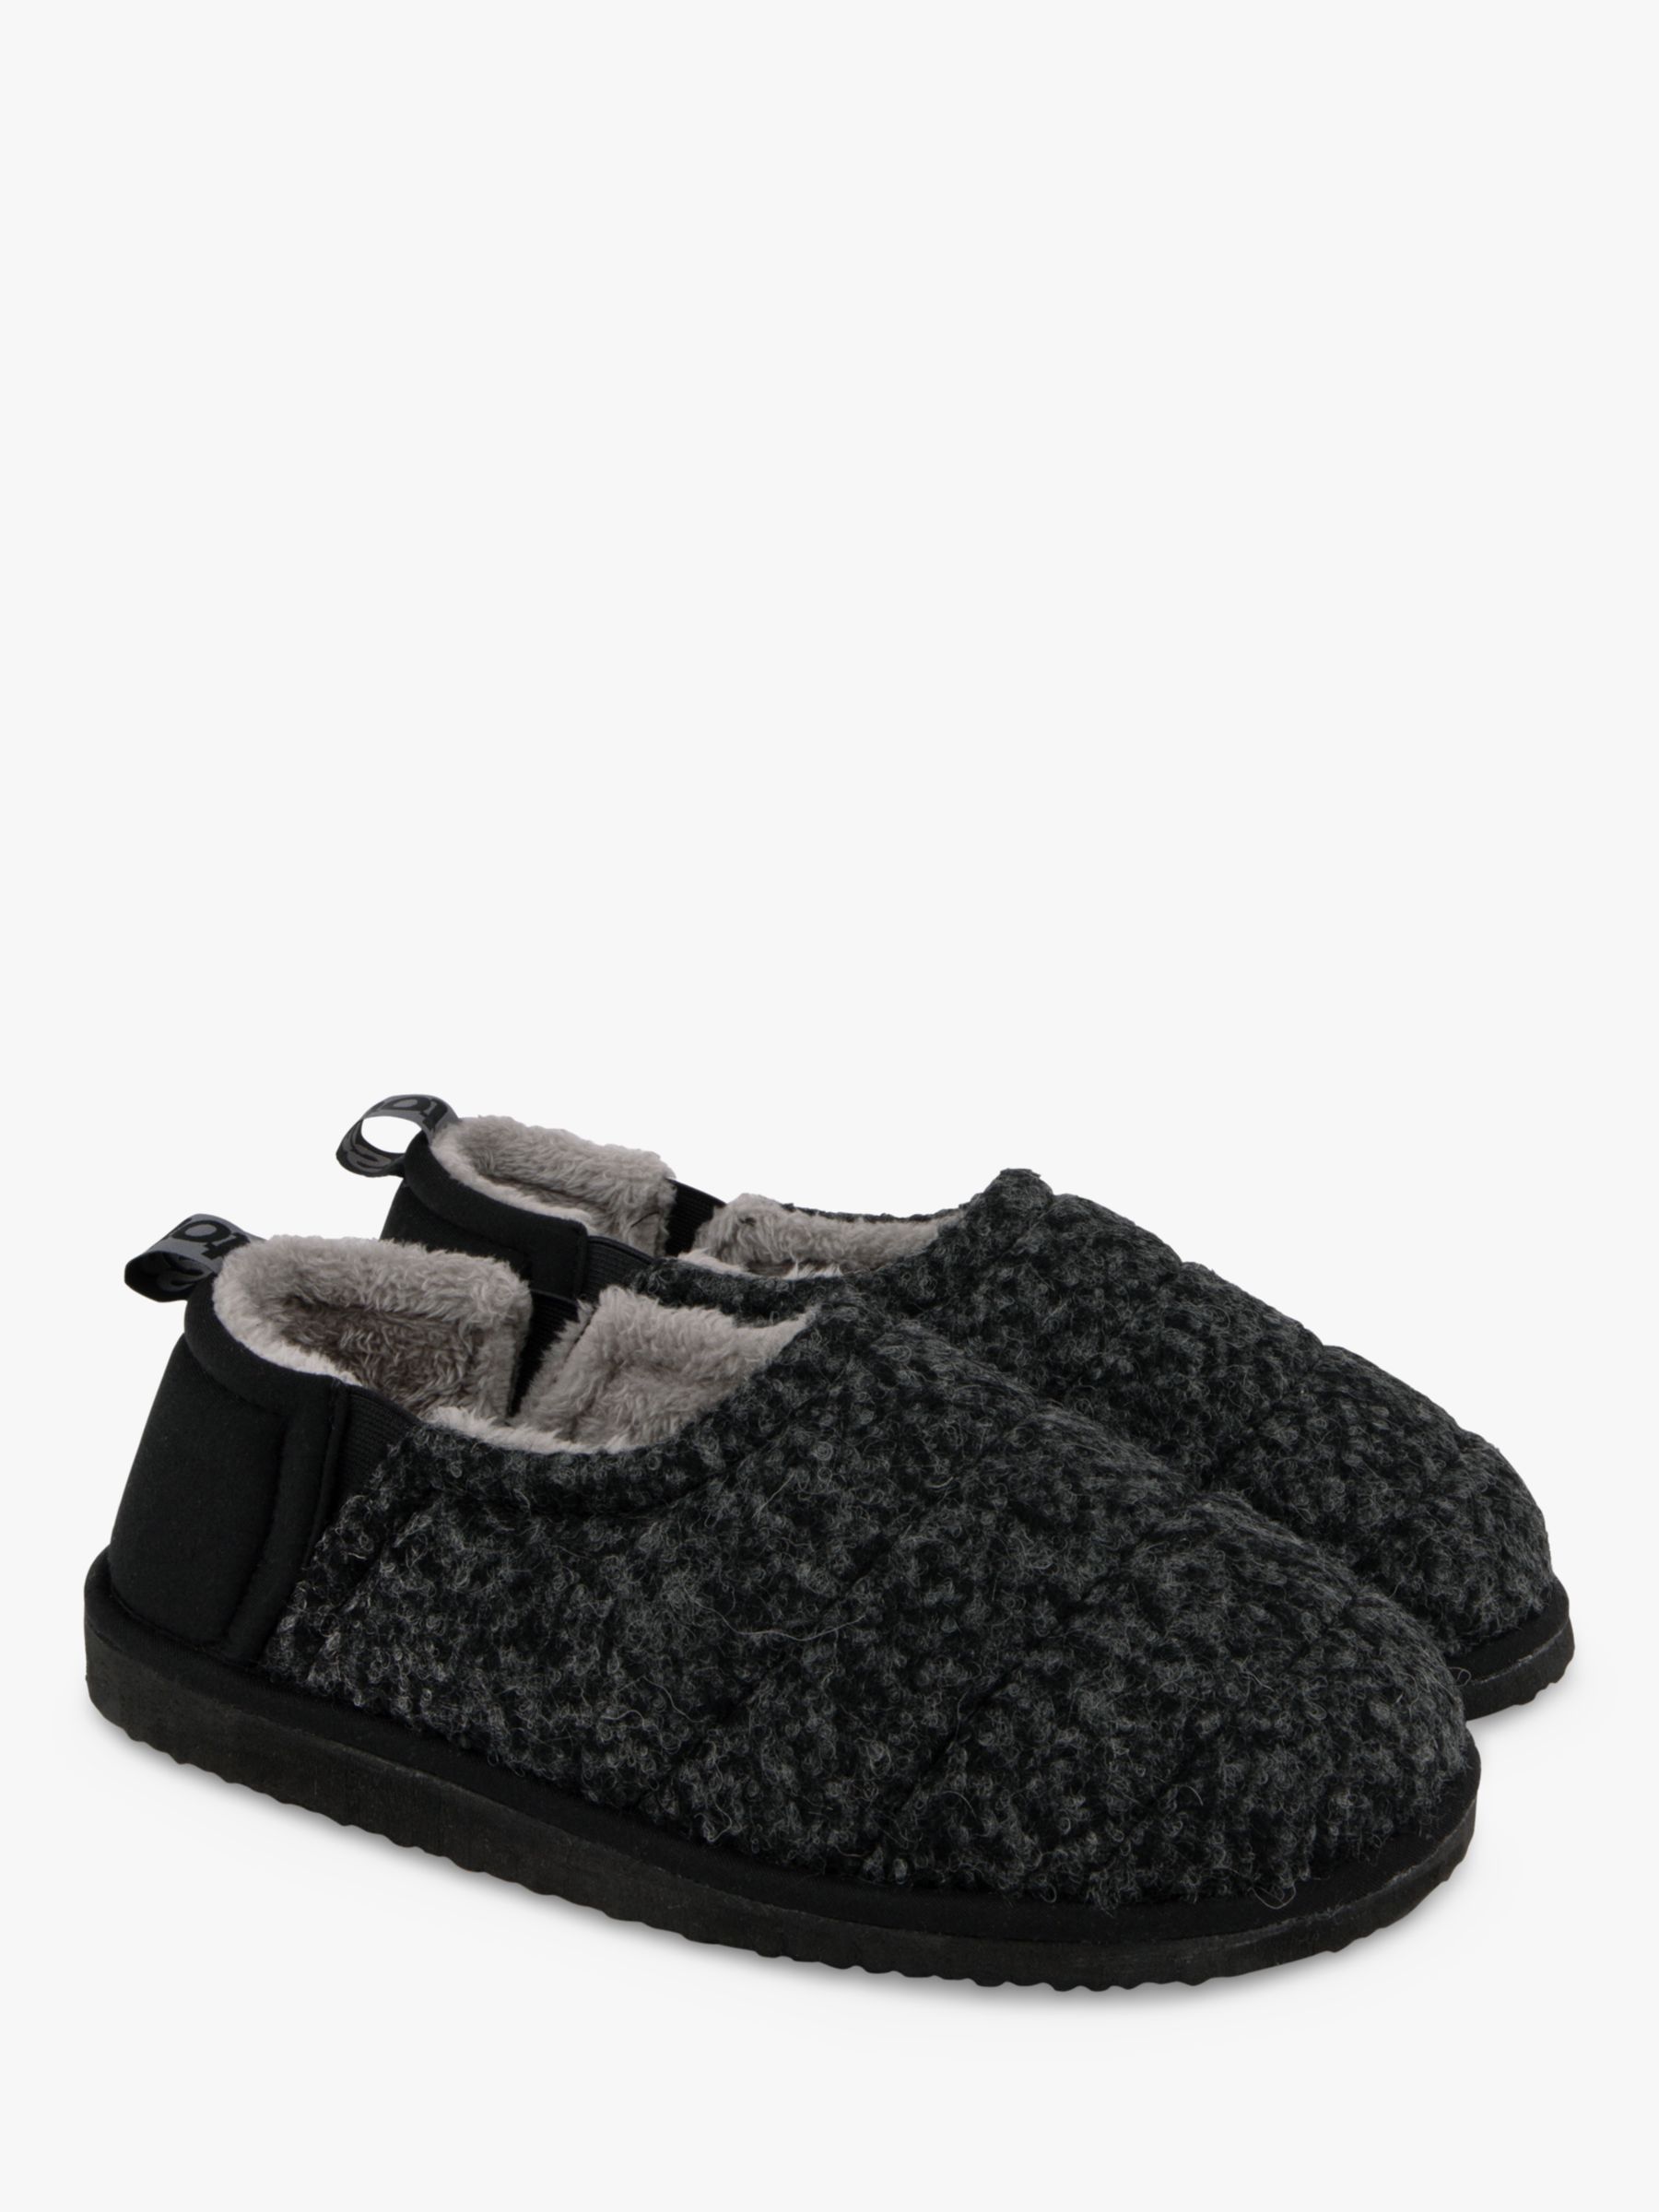 totes Quilted Full Back Slippers, Black at John Lewis & Partners